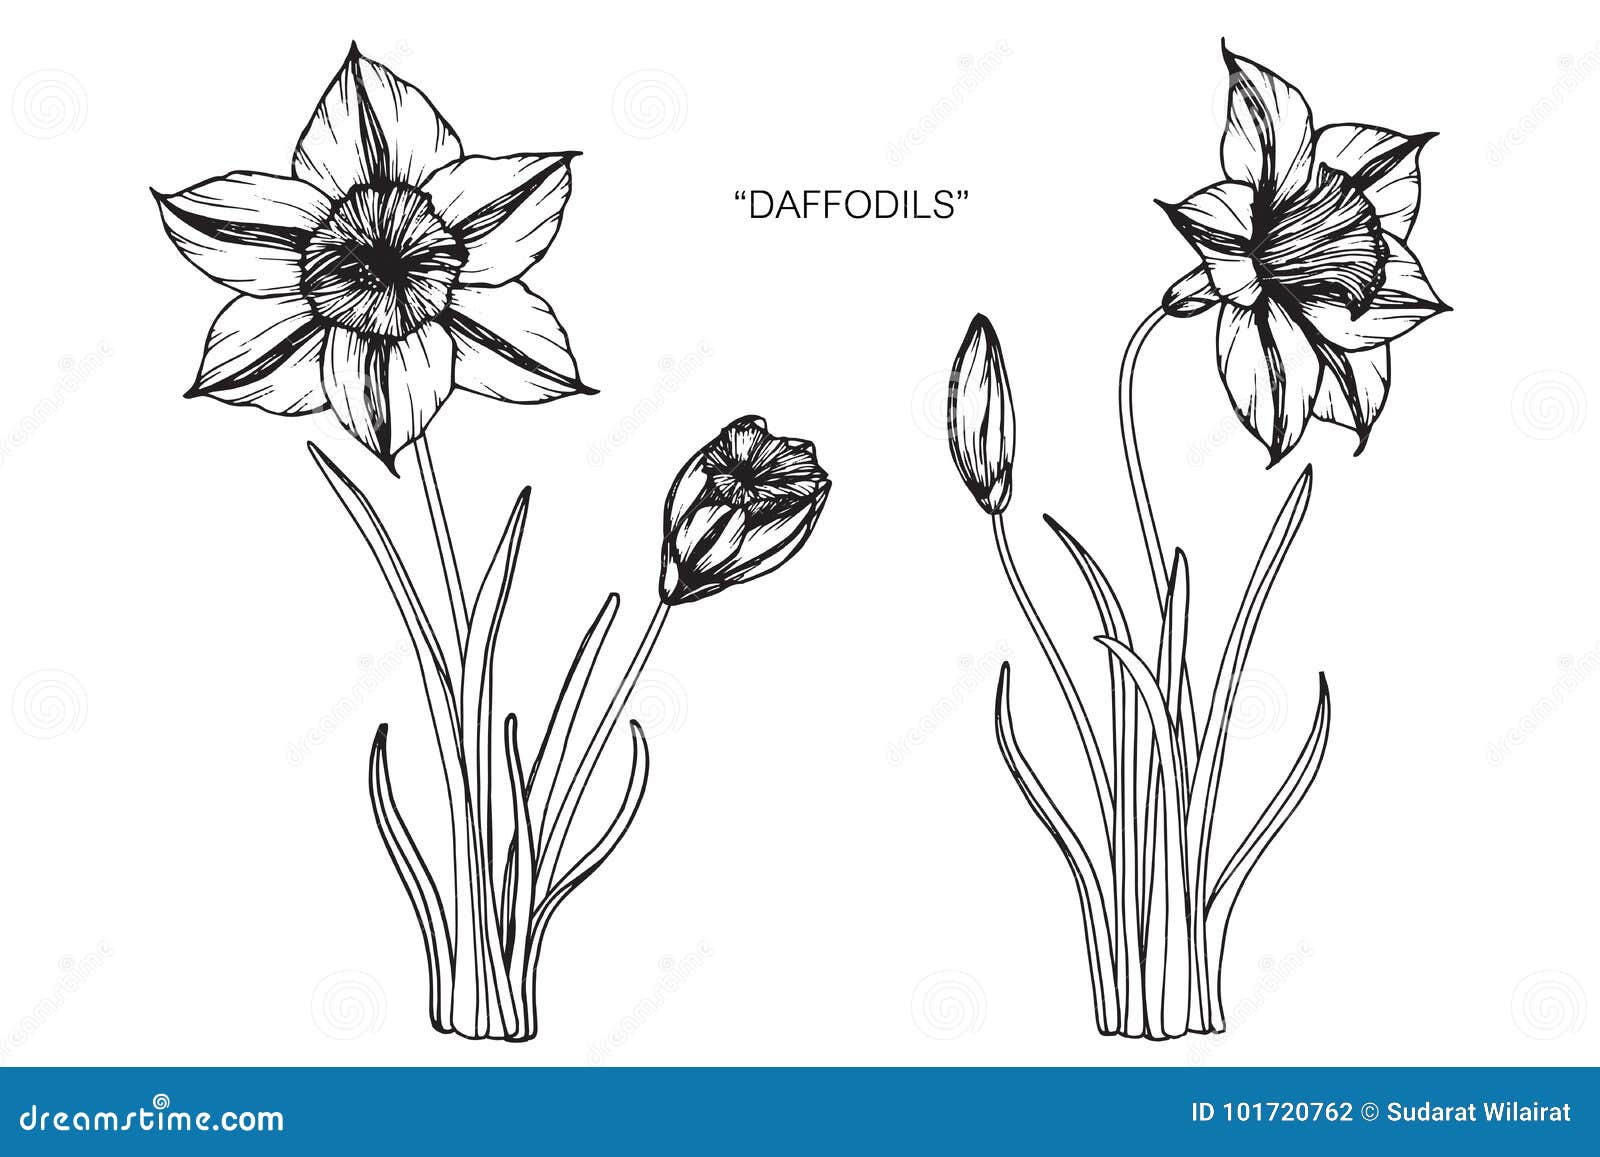 Daffodil Flowers Drawing And Sketch. Stock Illustration - Illustration ...